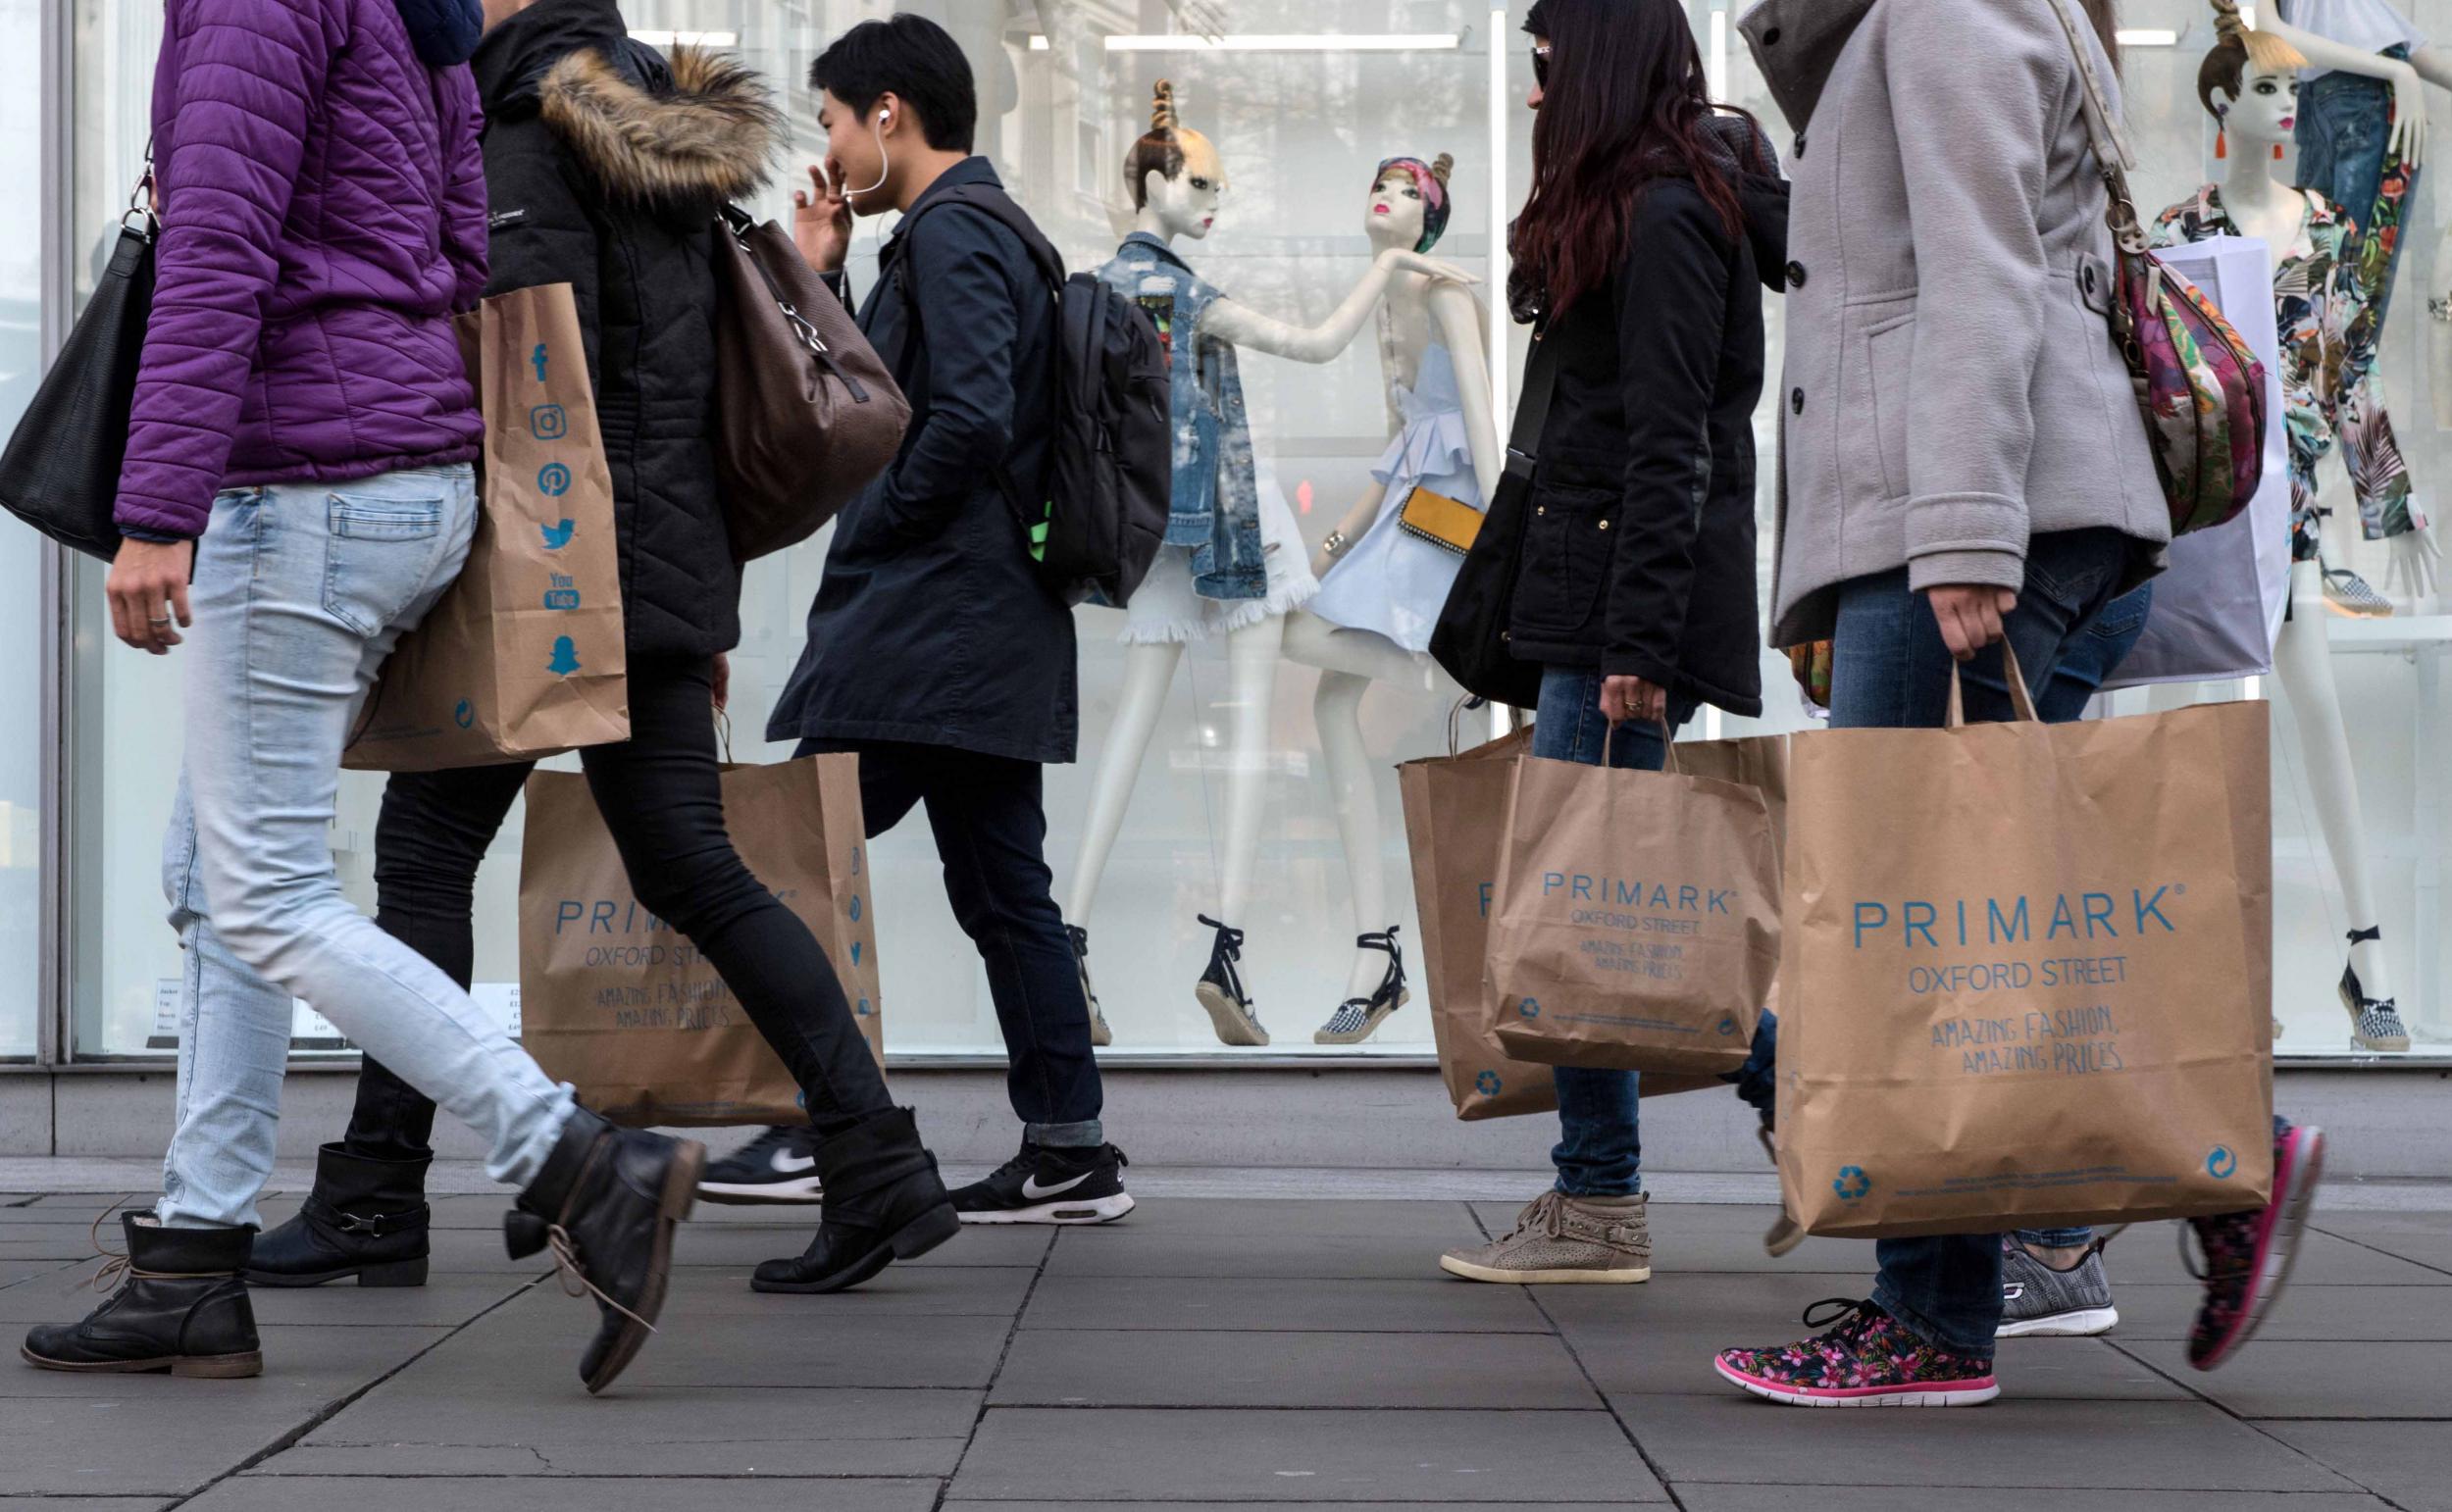 People particularly spent less on transport and communication last month. Spend on clothing and footwear fell too